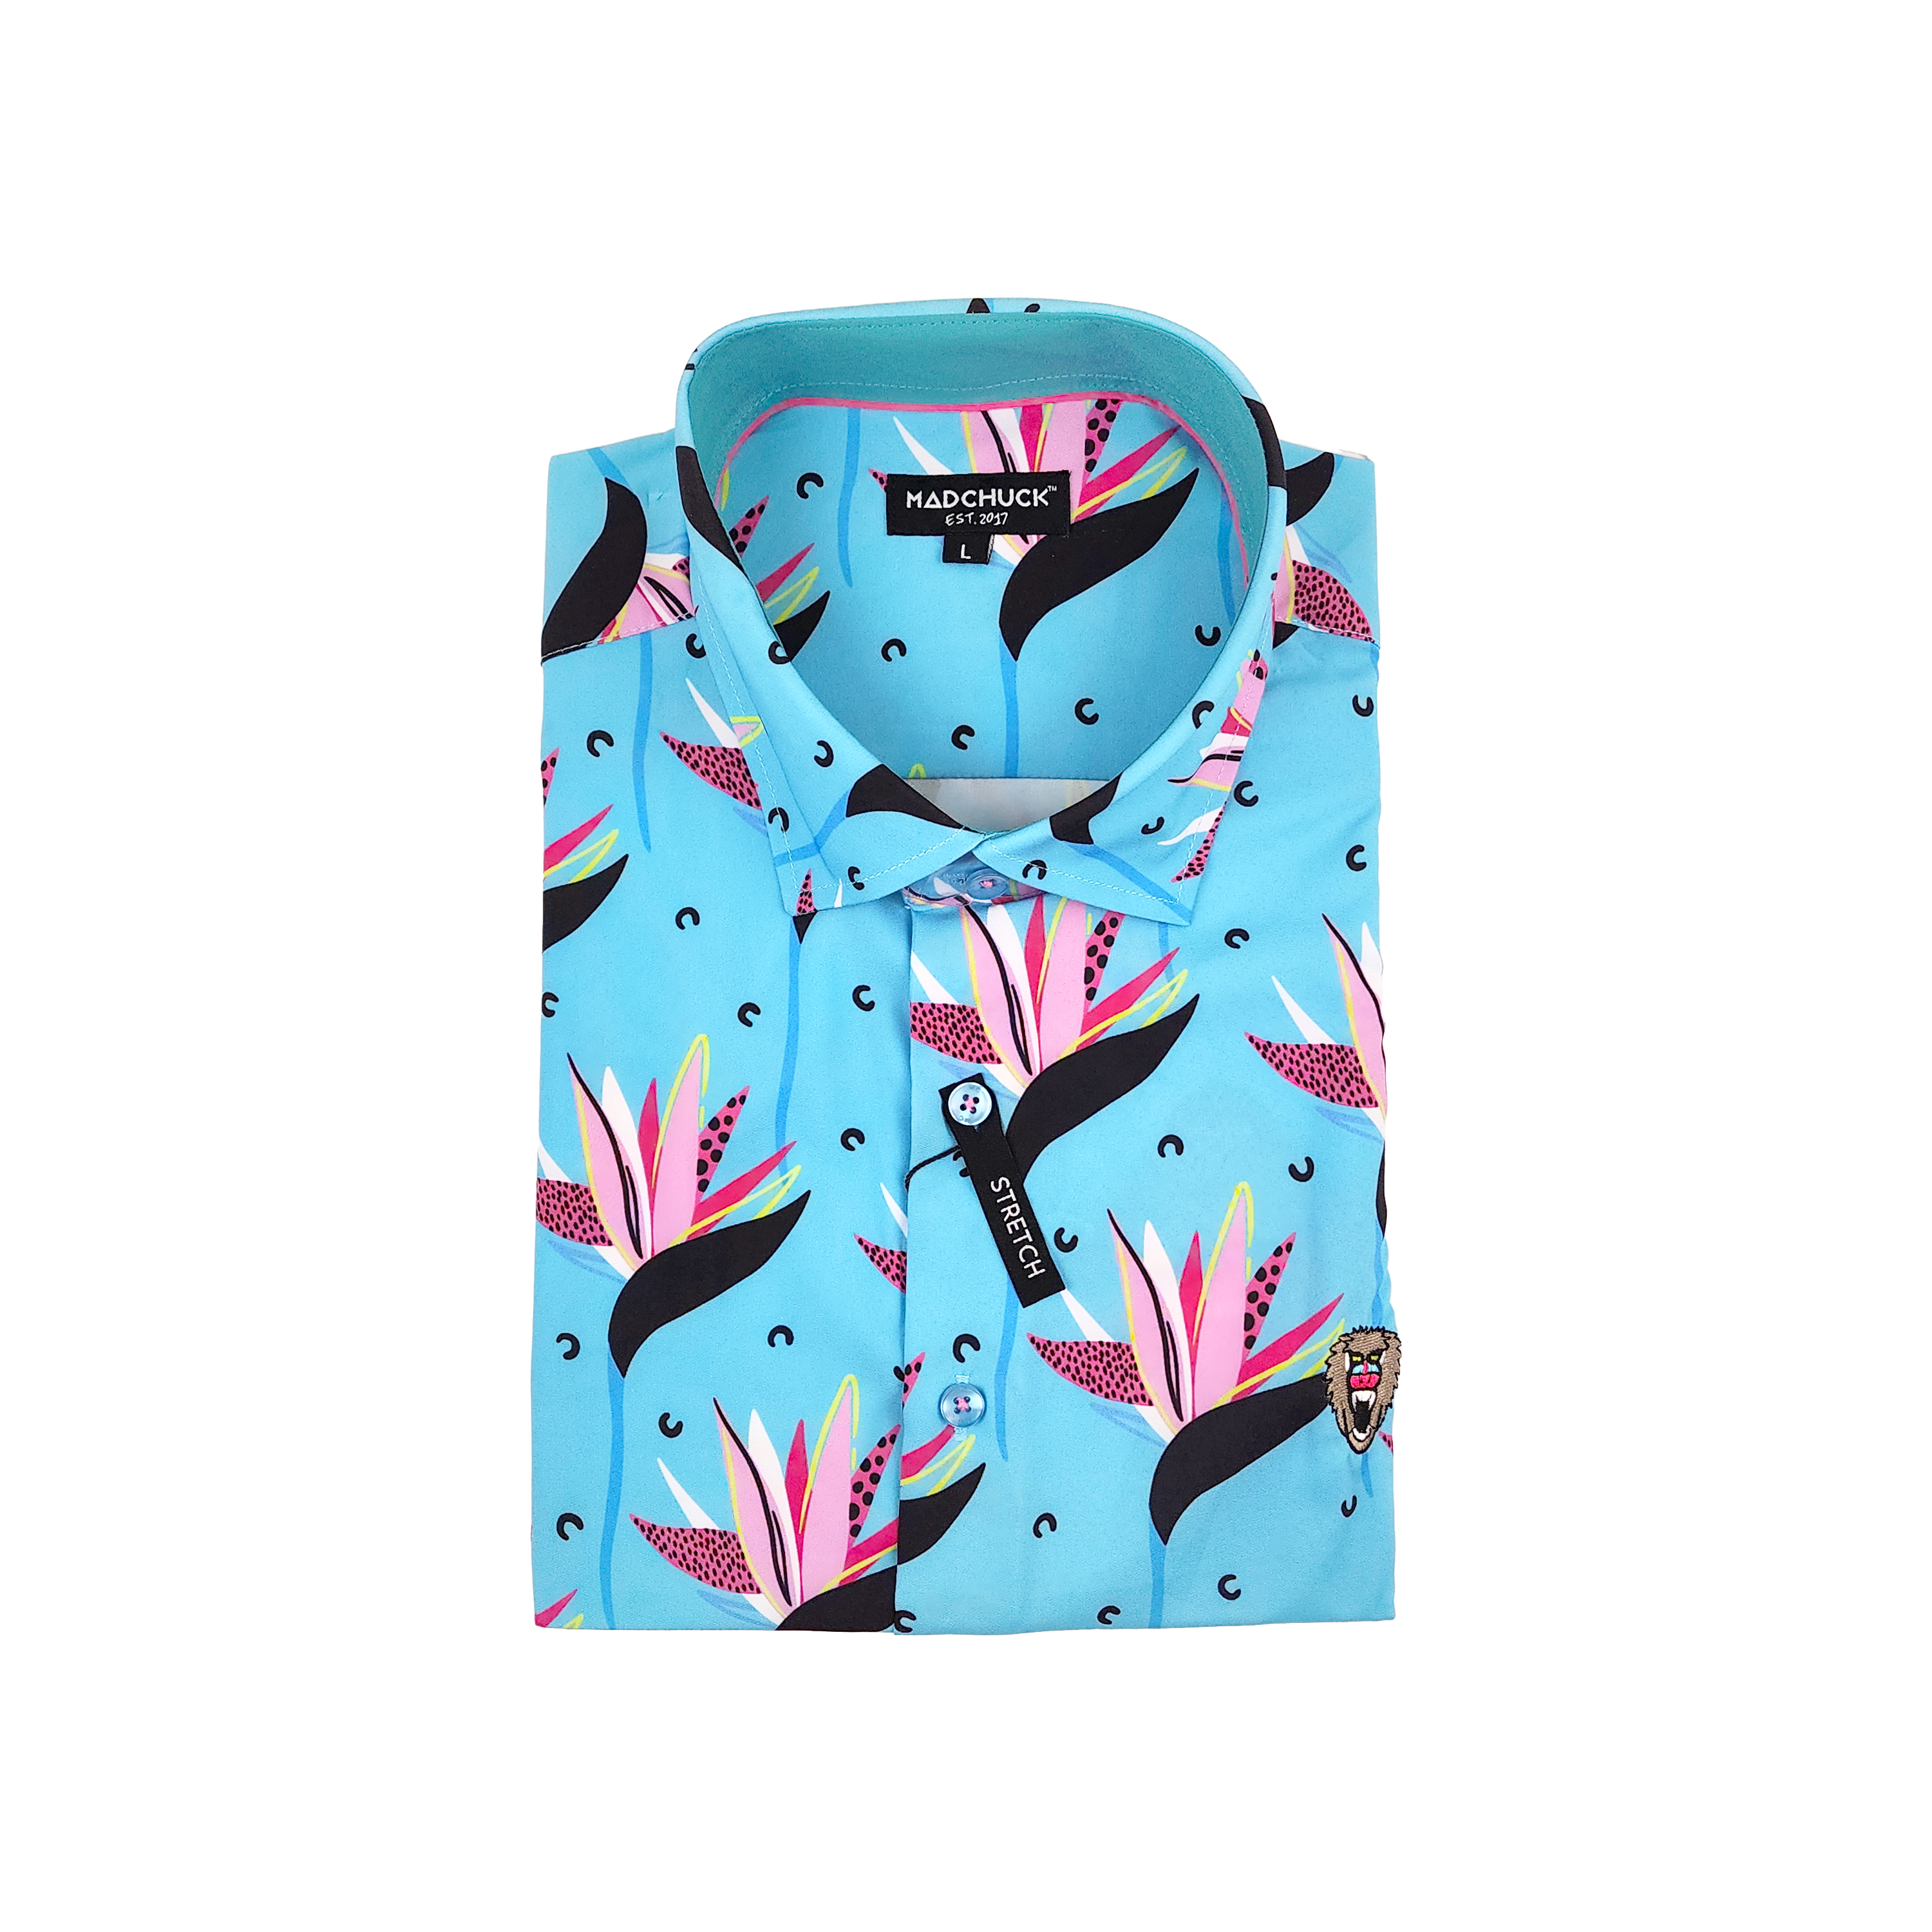 WATER LILLIES PRINT WOVEN - Mad Chuck™ Main Product Photo